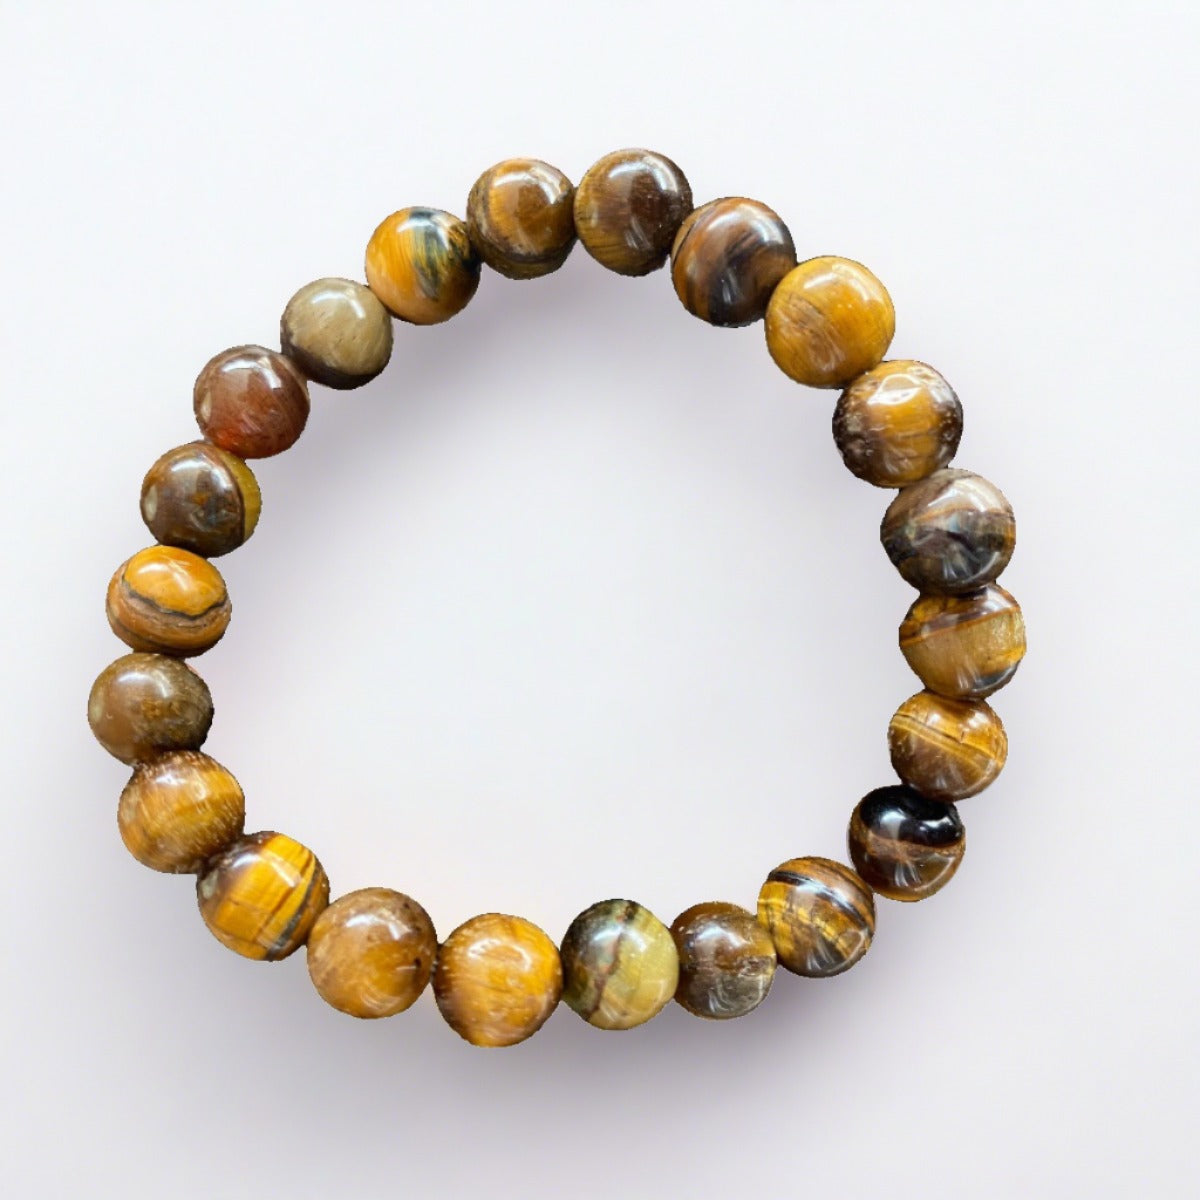 Tiger eye bracelet for strength and protection